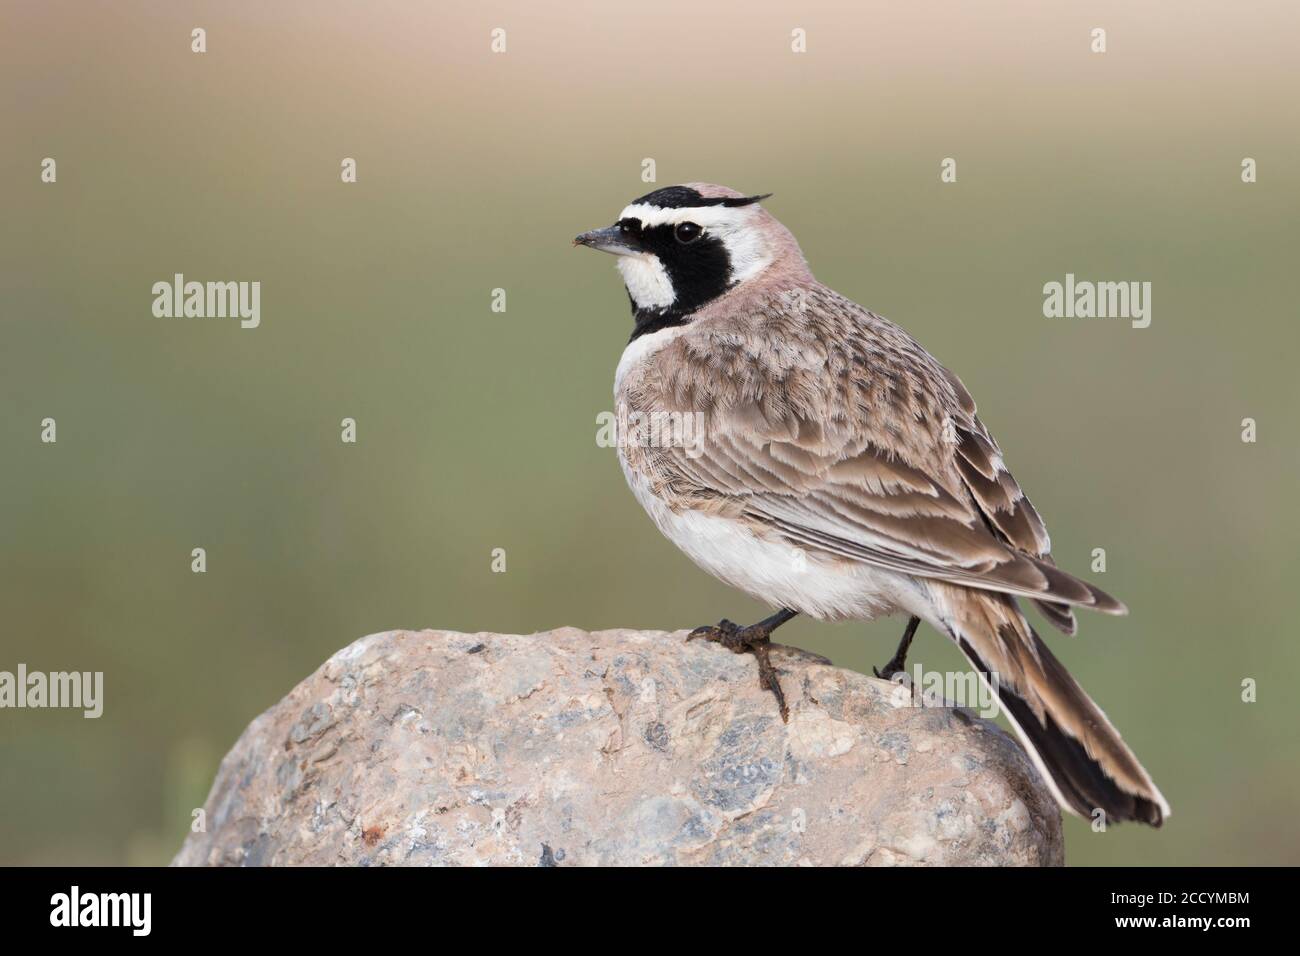 Adult Steppe Horned Lark (Eremophila alpestris brandtii) in breeding plumage, standing on the ground in steppes of Kyrgyzstan. On lookout looking over Stock Photo